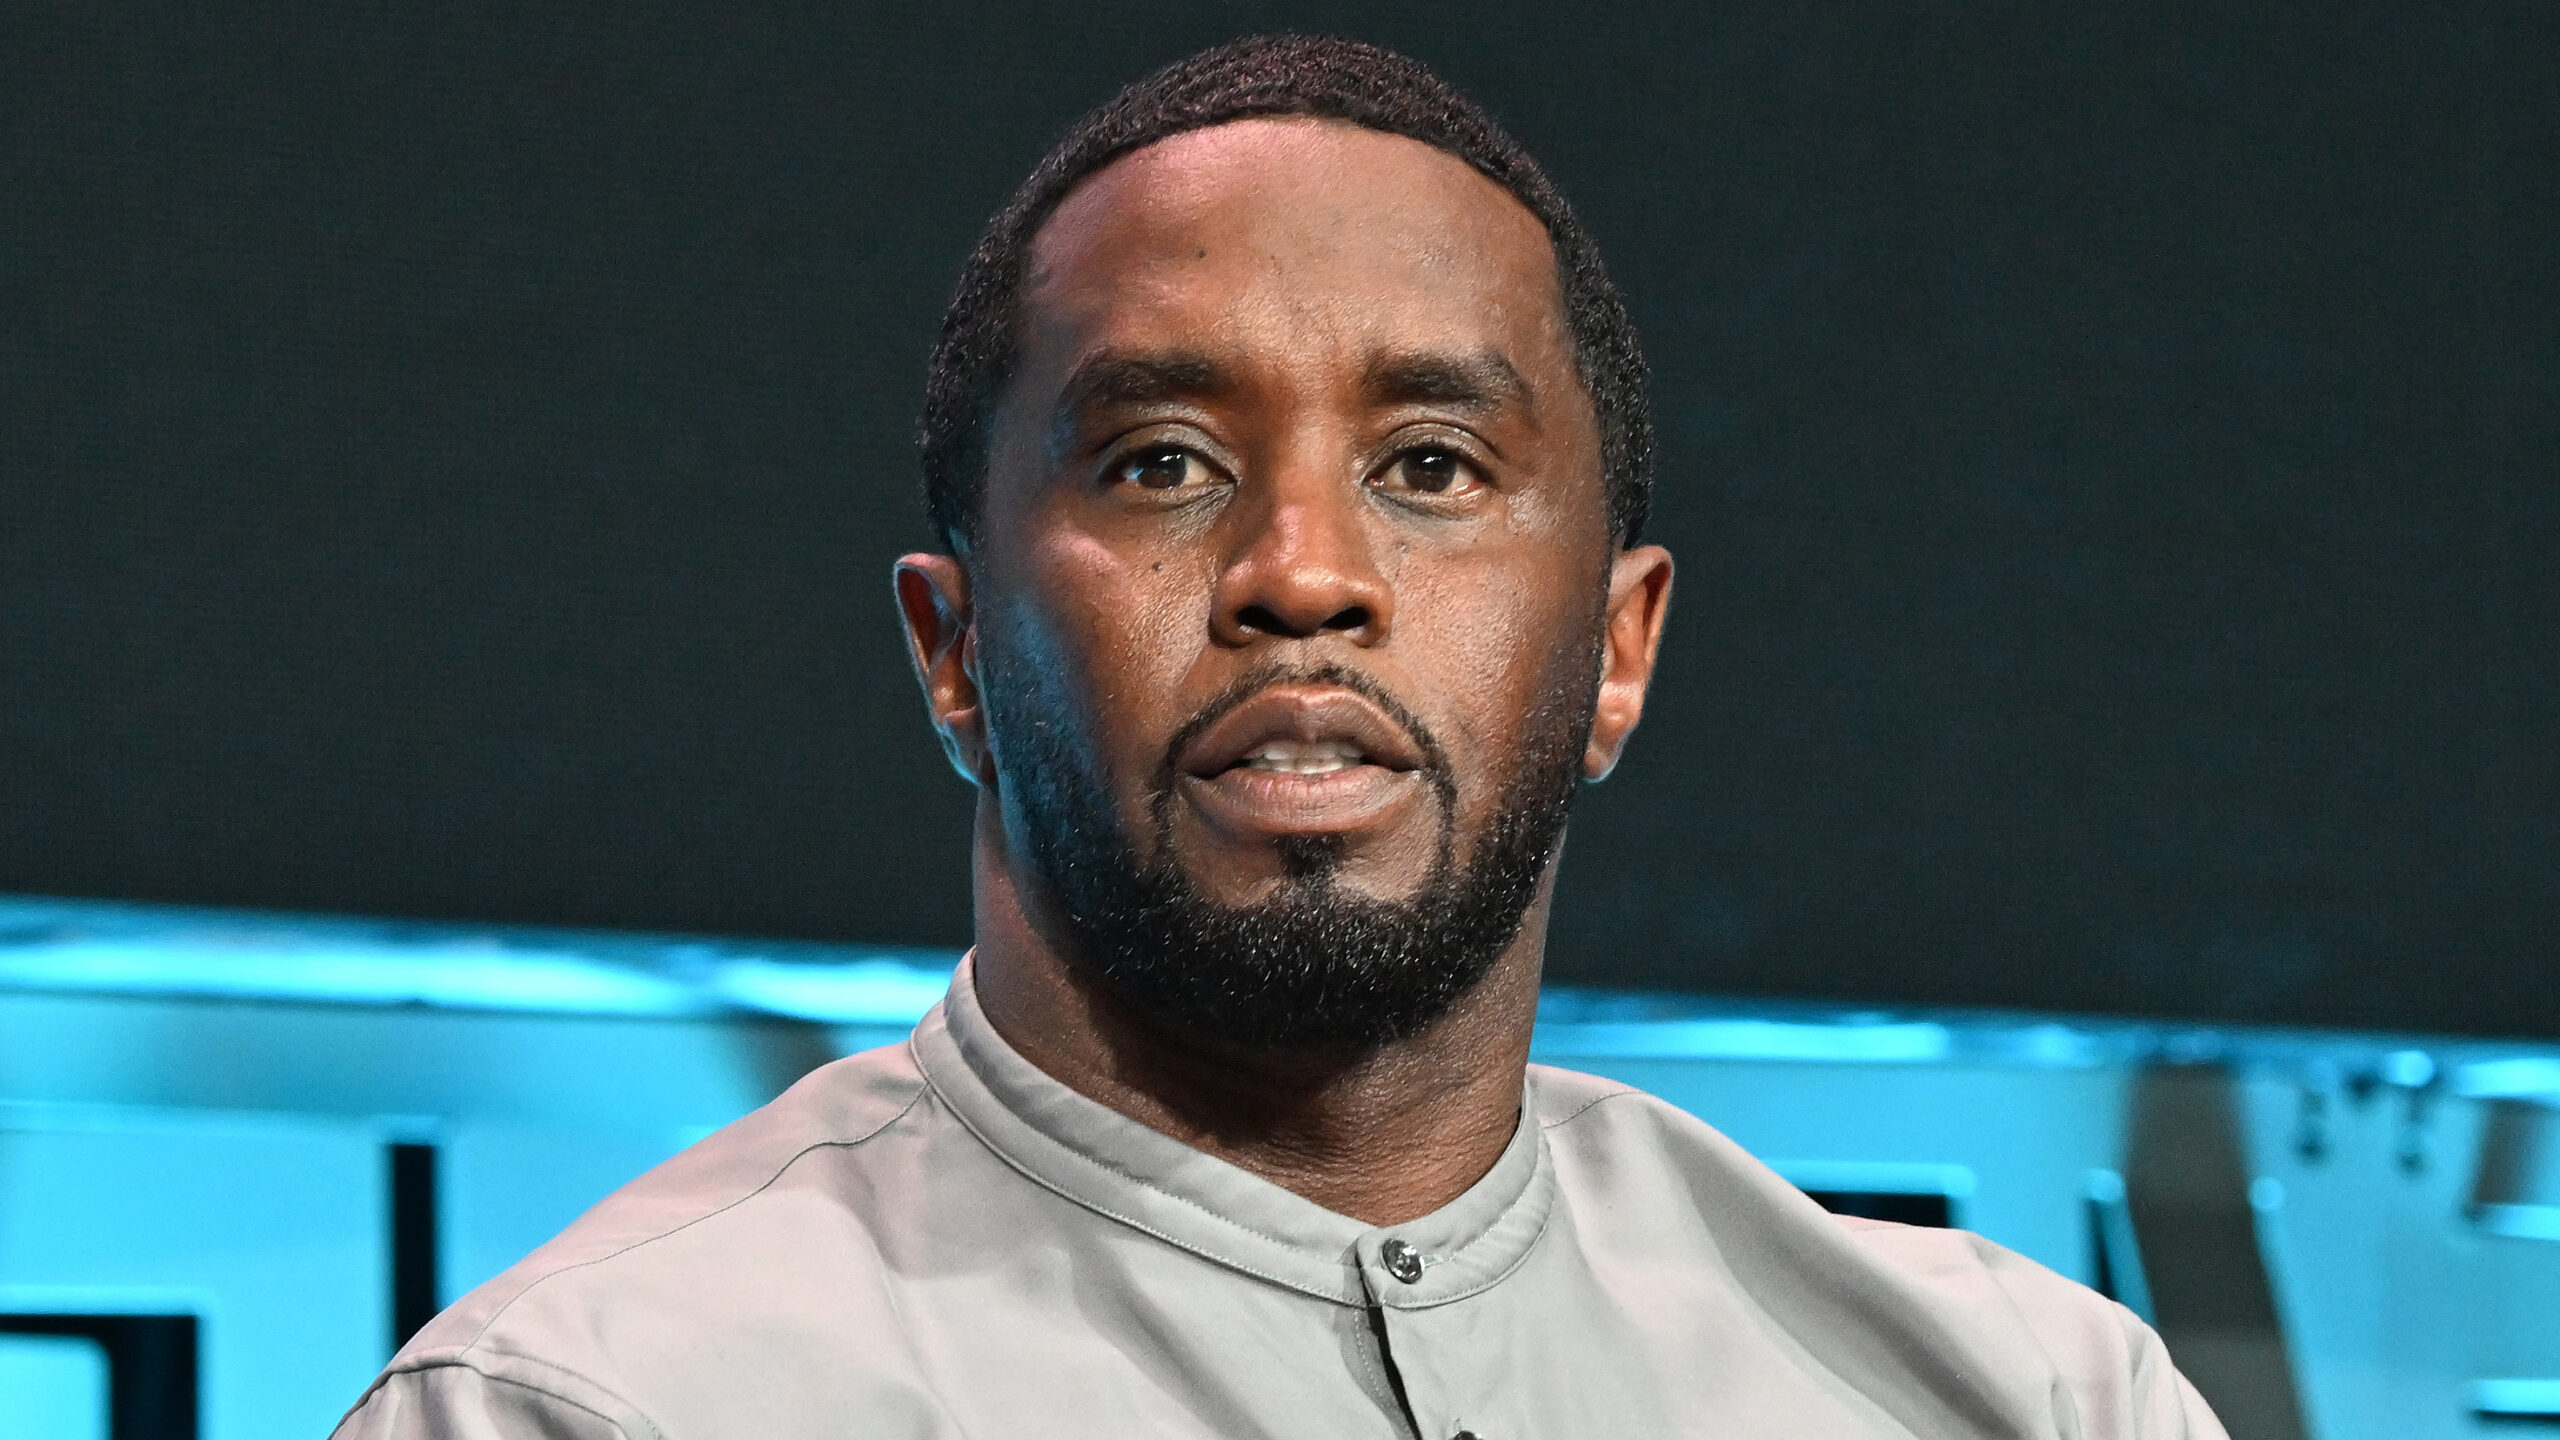 Sean ‘Diddy’ Combs Confesses to Mistreating Cassie Ventura: ‘I Was in a Bad Place